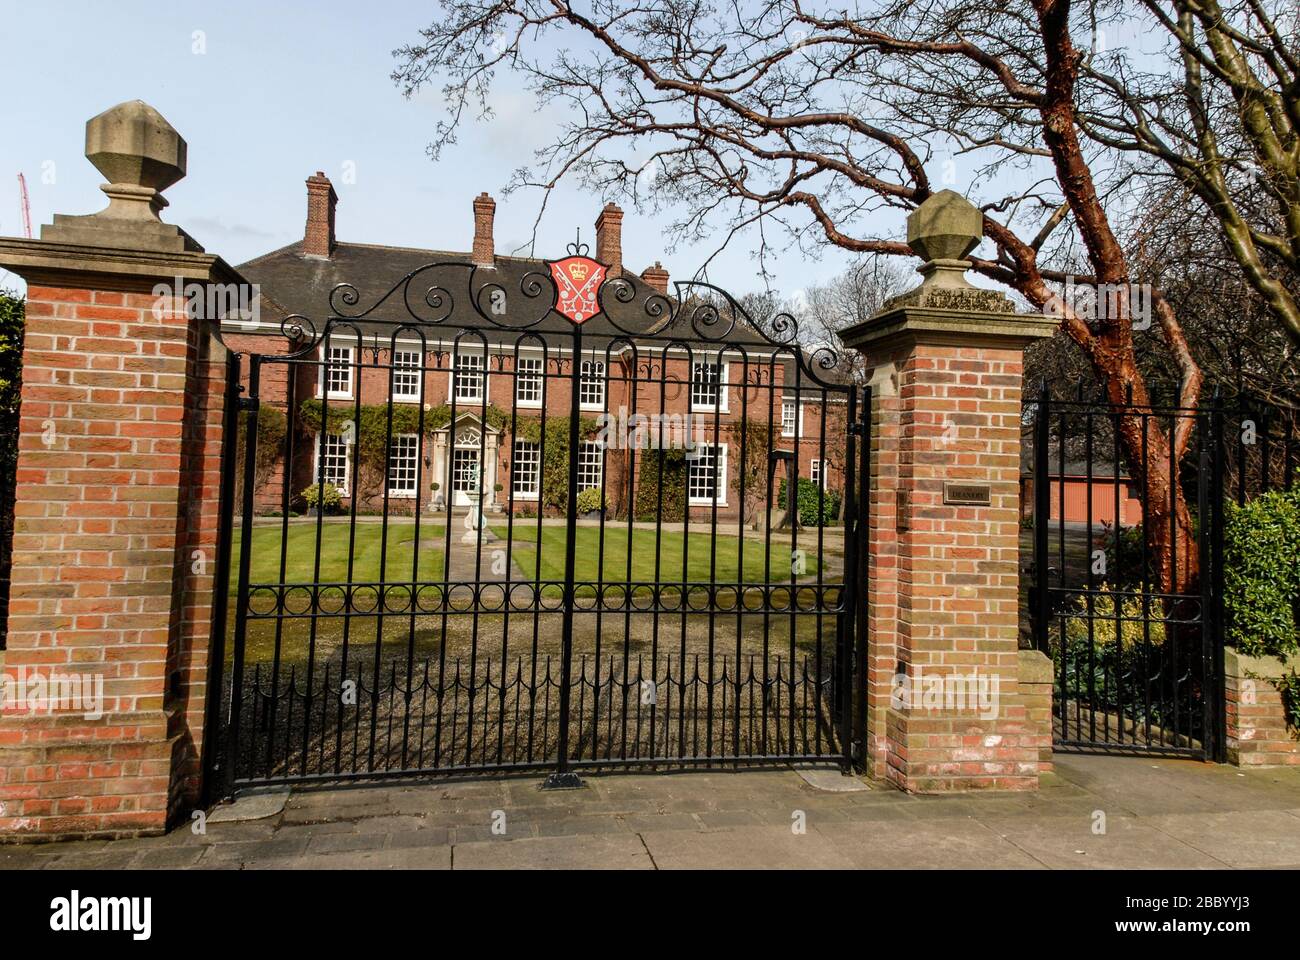 The Deanery in Dean's Park is close to York Minster, York, England.  At the top of the main gate is the Archbishop of York arms. Stock Photo